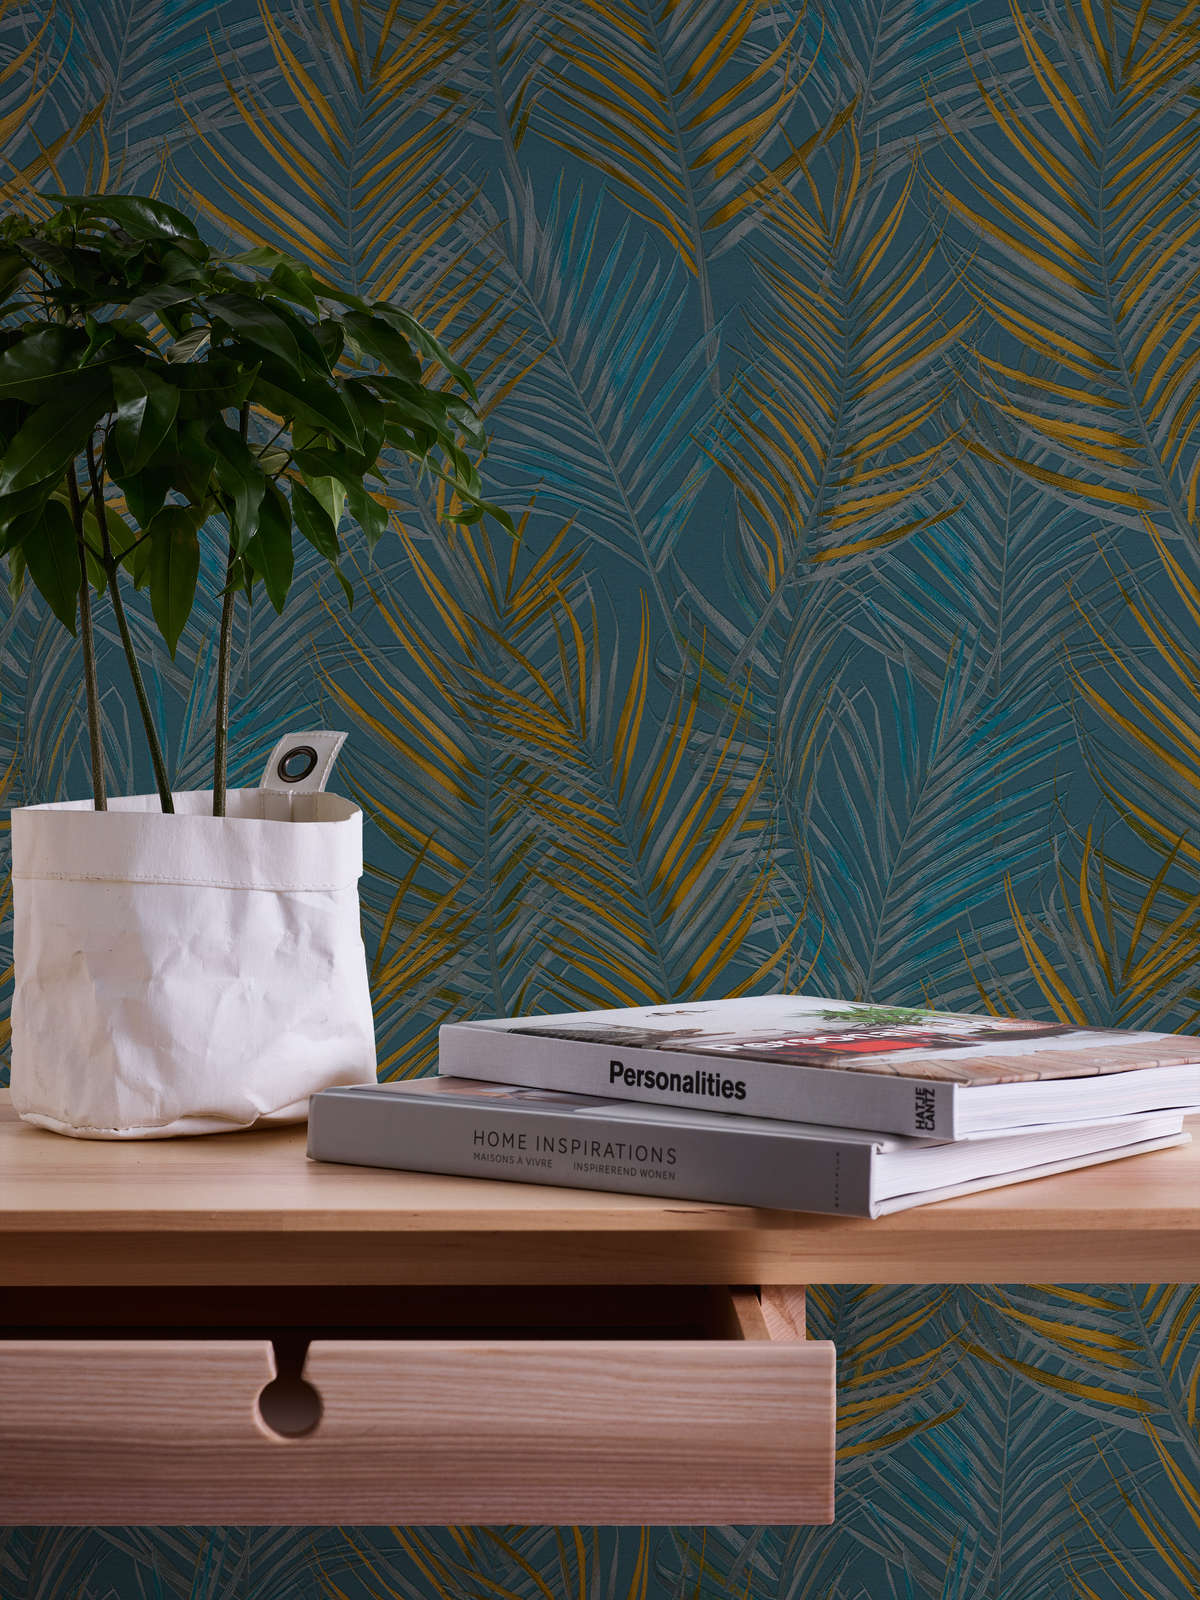             wallpaper jungle pattern with palm leaves - blue, yellow, petrol
        